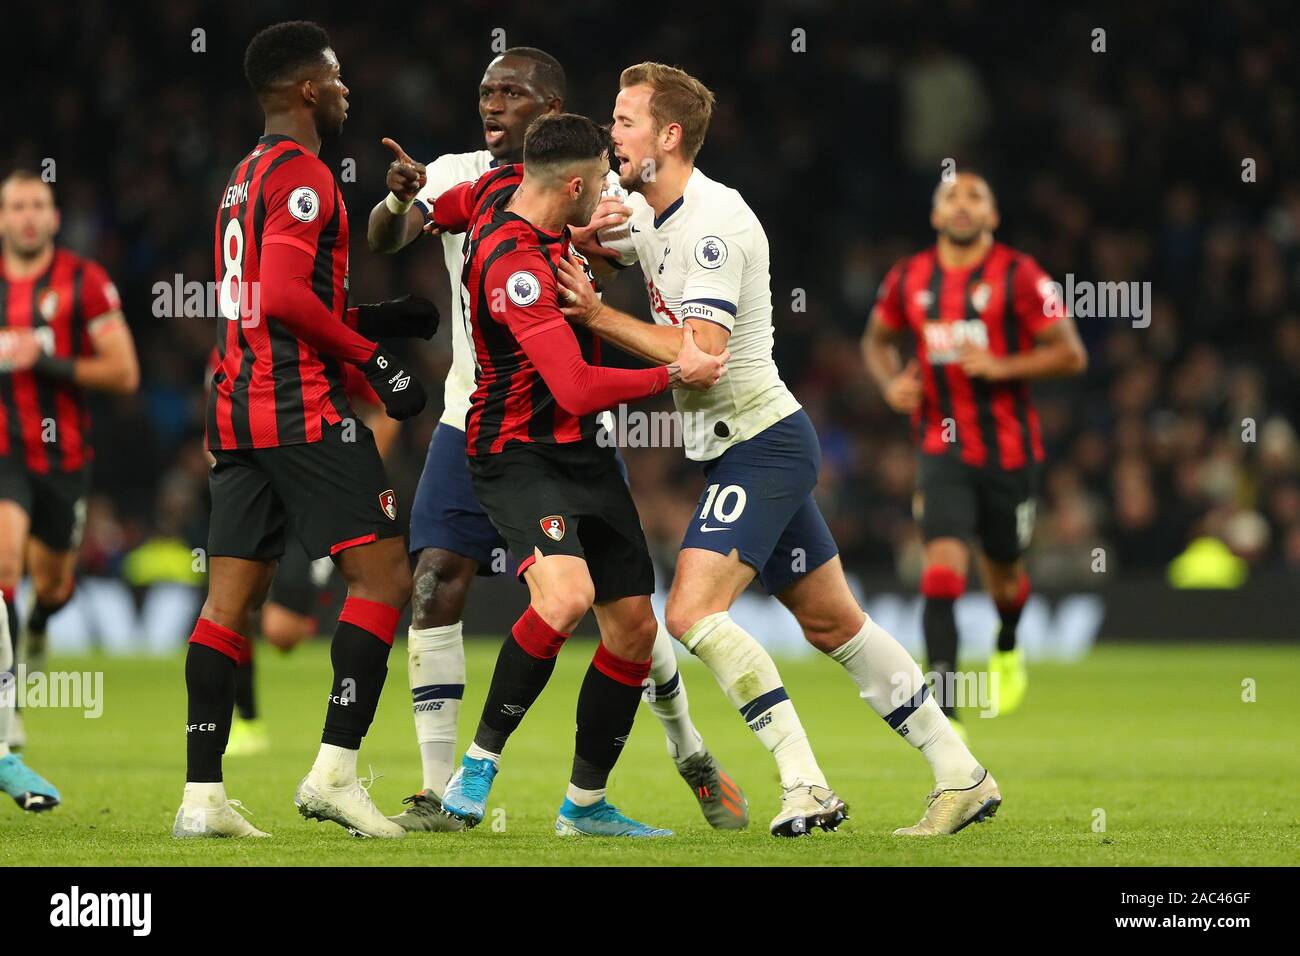 Tottenham's forward Harry Kane gets upset with Bournemouth's midfielder Jefferson Lerma during the Barclays Premier League match between Tottenham Hotspur and Bournemouth at the Tottenham Hotspur Stadium, London, England. On the 30th November 2019. (Photo by AFS/Espa-Images) Stock Photo